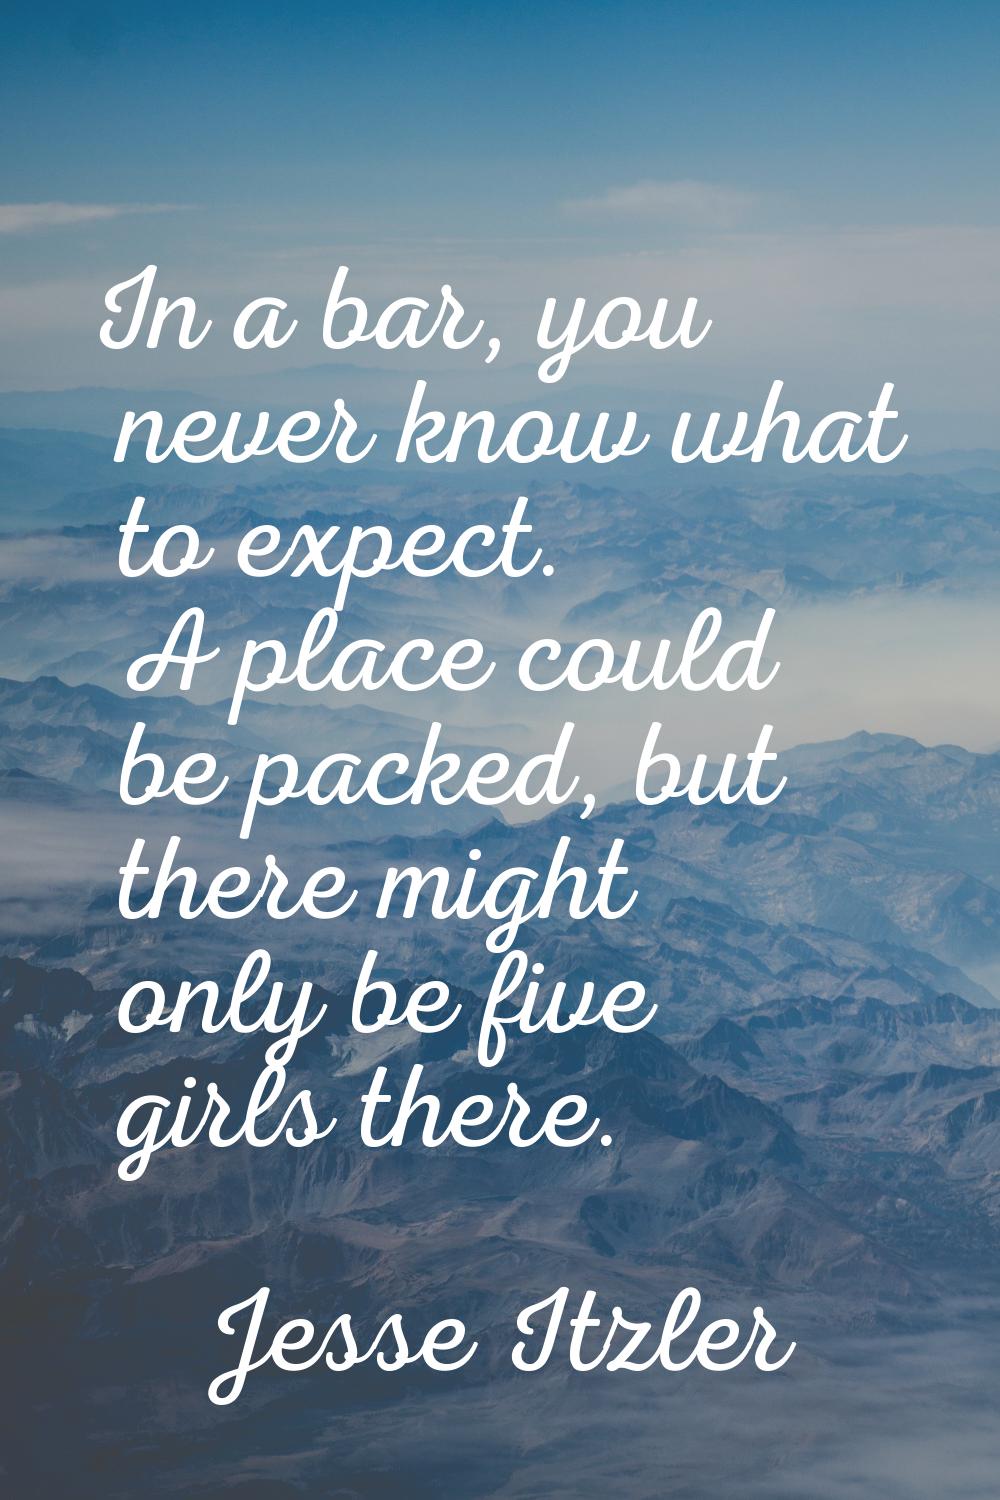 In a bar, you never know what to expect. A place could be packed, but there might only be five girl